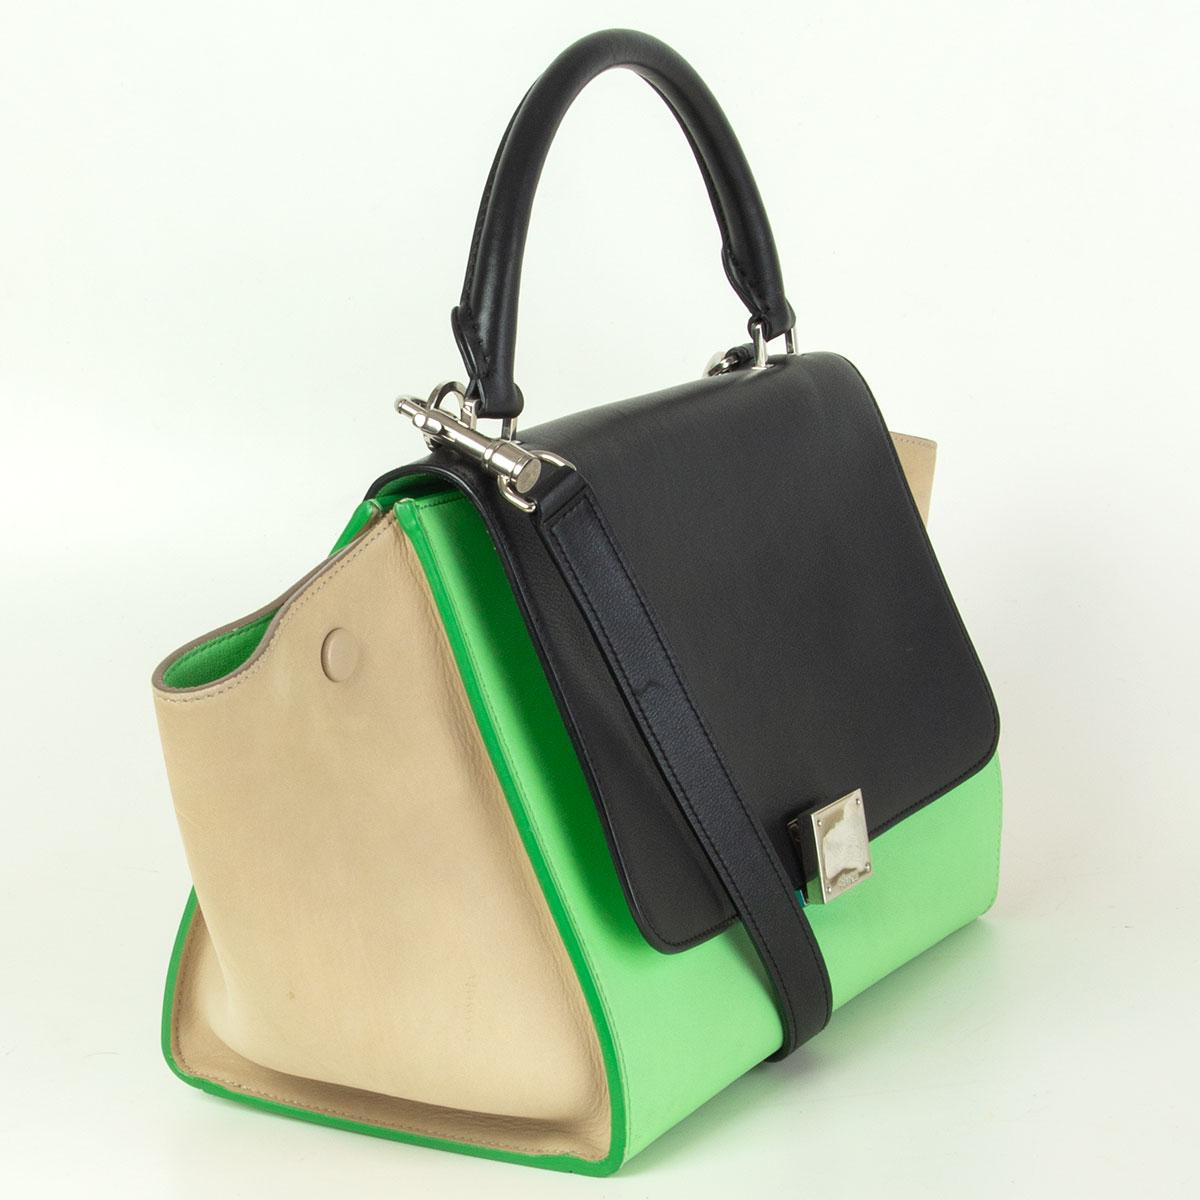  Céline 'Small Trapeze' Tri-Color shoulder bag in black, lime and sand  smooth calfskin. The bag features a looping top handle, an optional shoulder strap with silver clasps, expandable sides, and a cross over flap. Opens with a silver-tone press